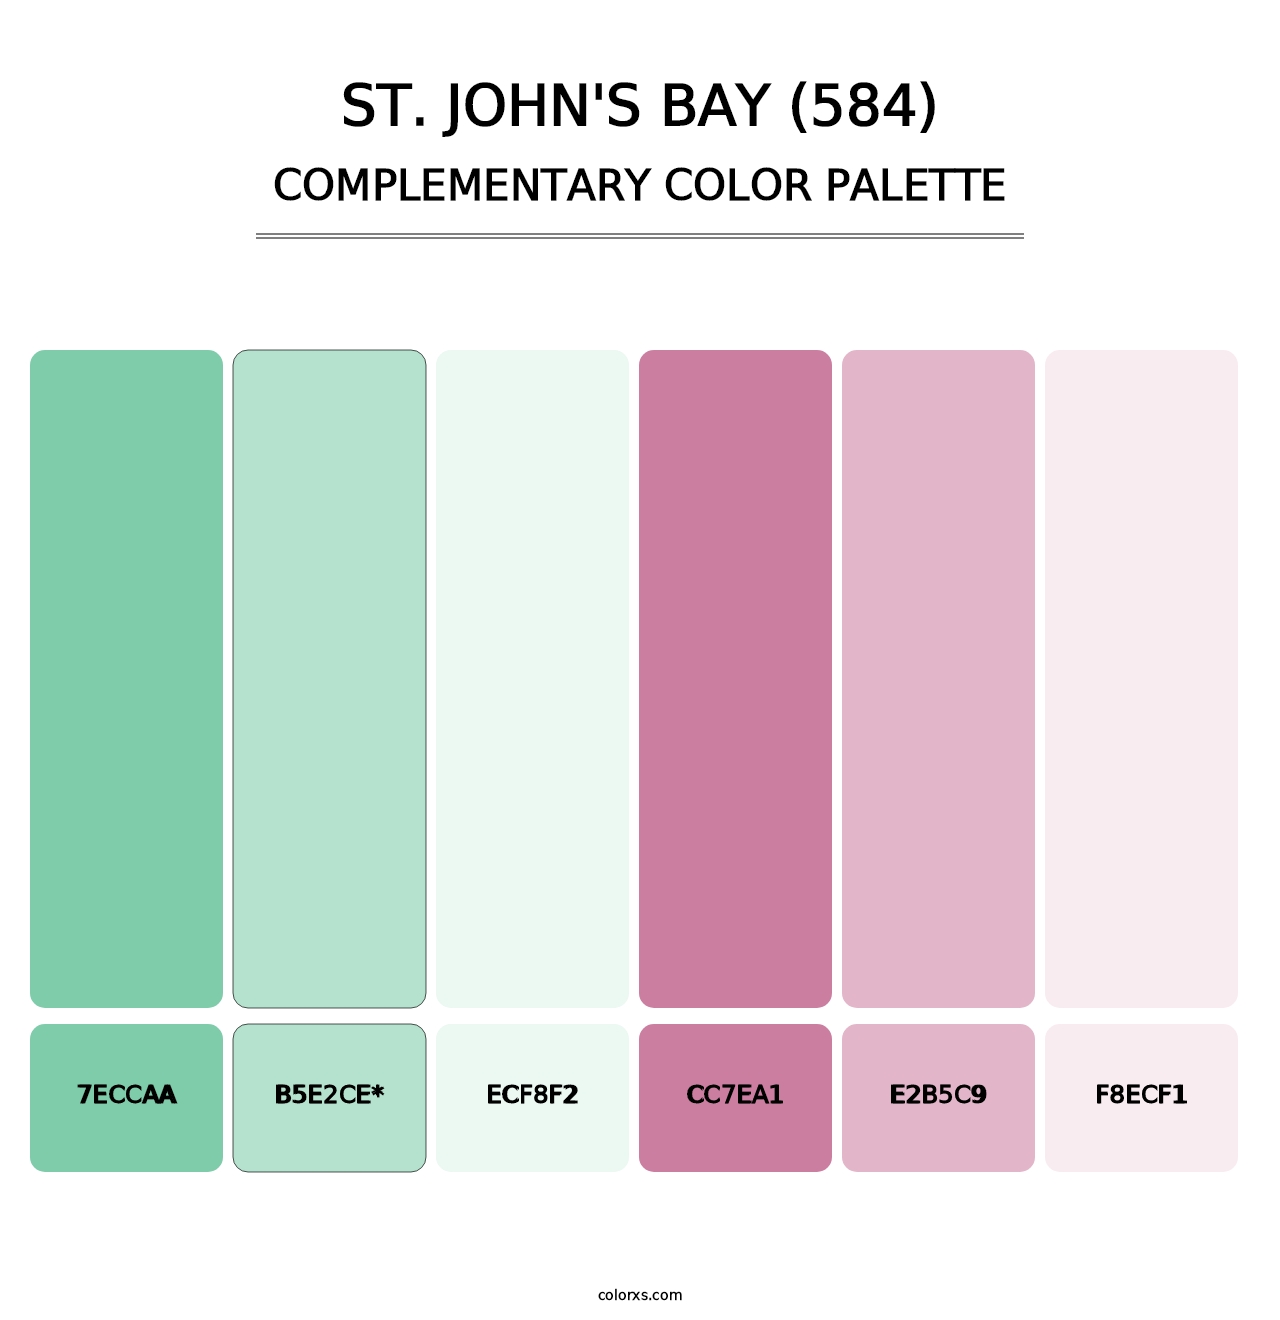 St. John's Bay (584) - Complementary Color Palette